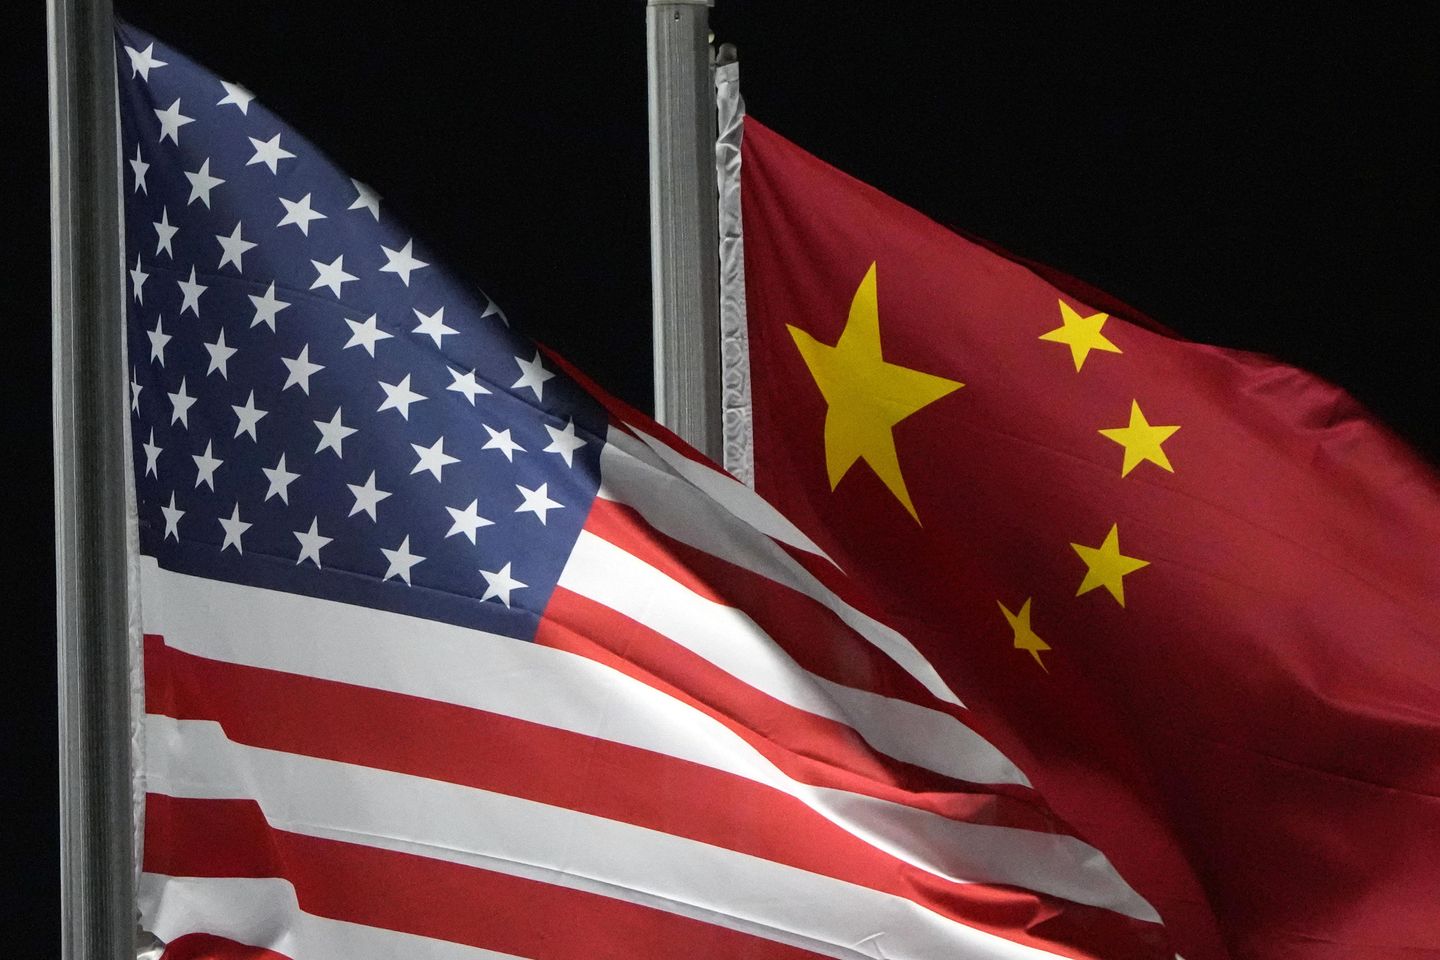 LISTEN: How did China beat the U.S. at its own diplomatic game?